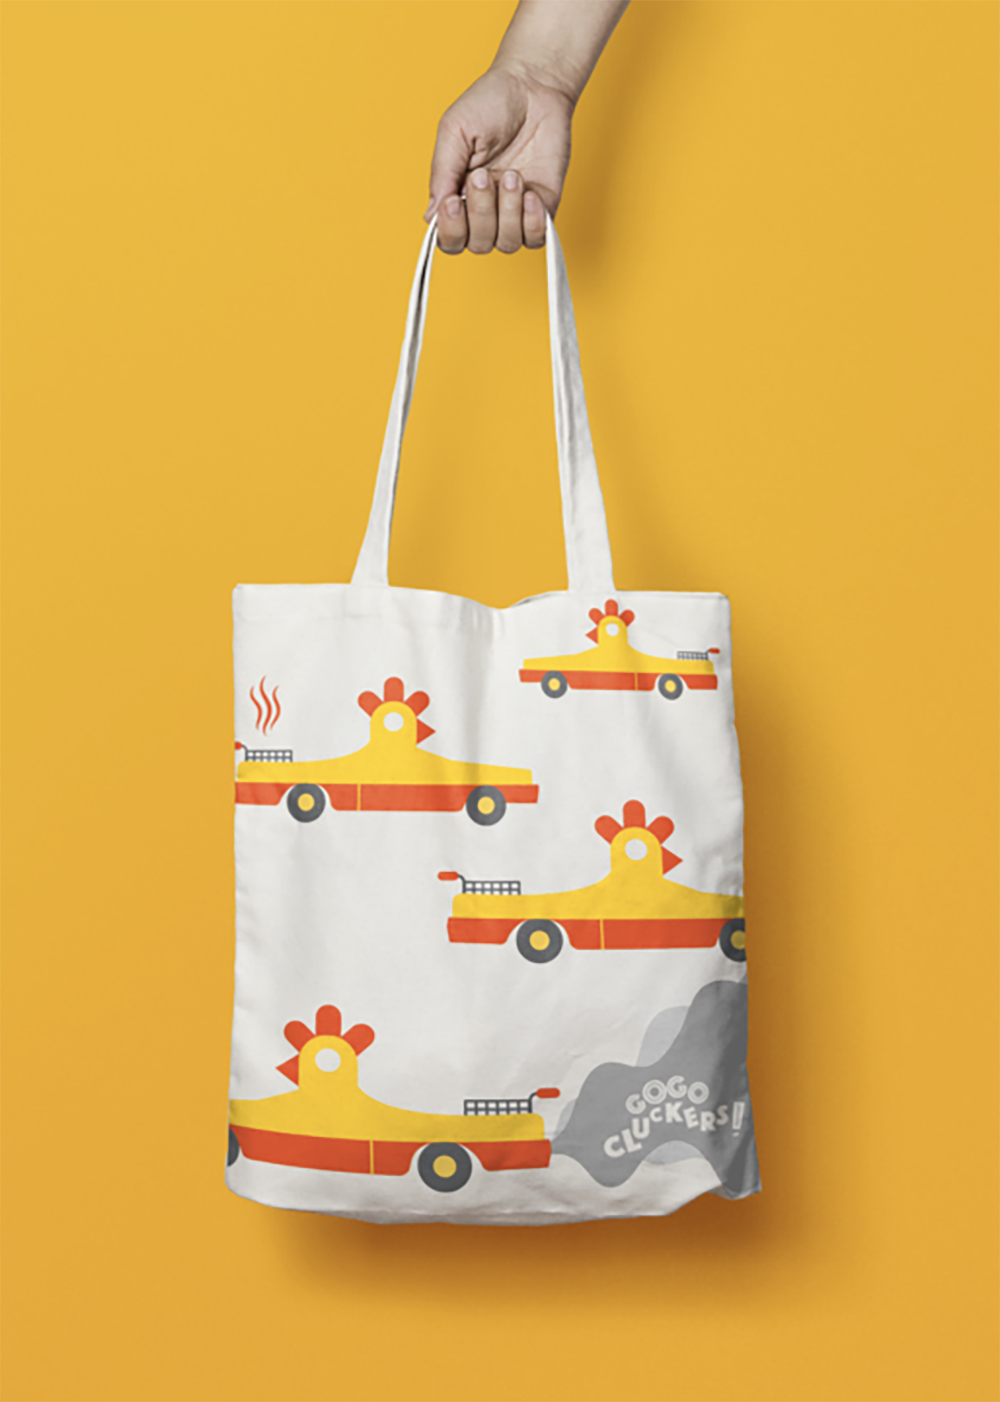 GoGo Cluckers Tote bag